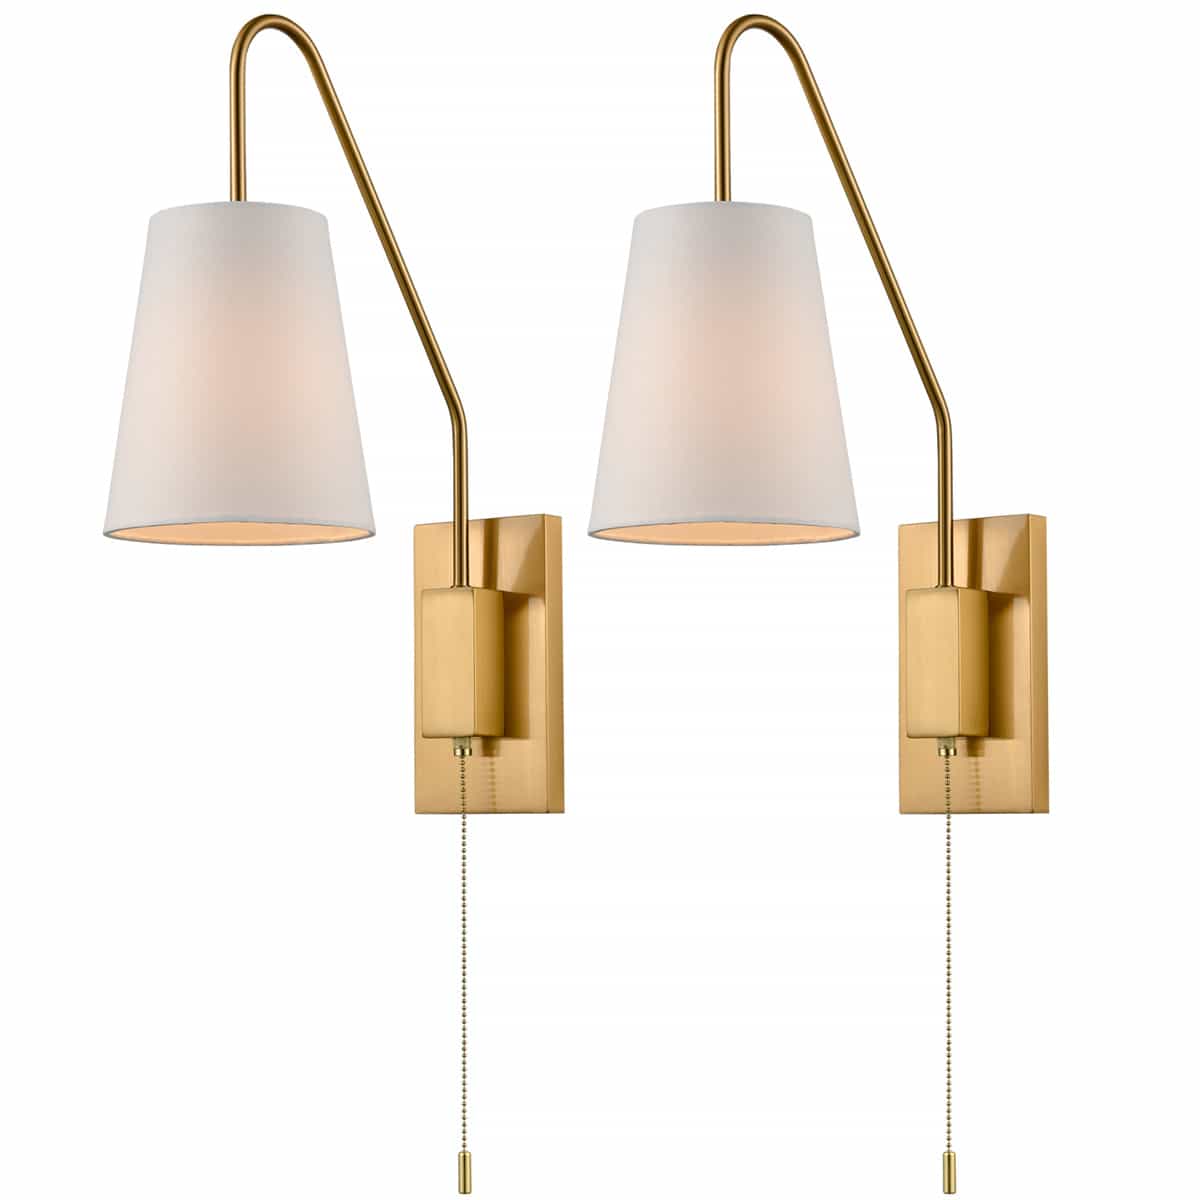 Modern Brass Wall Lamps Set of 2 Plug-In Wall Lights